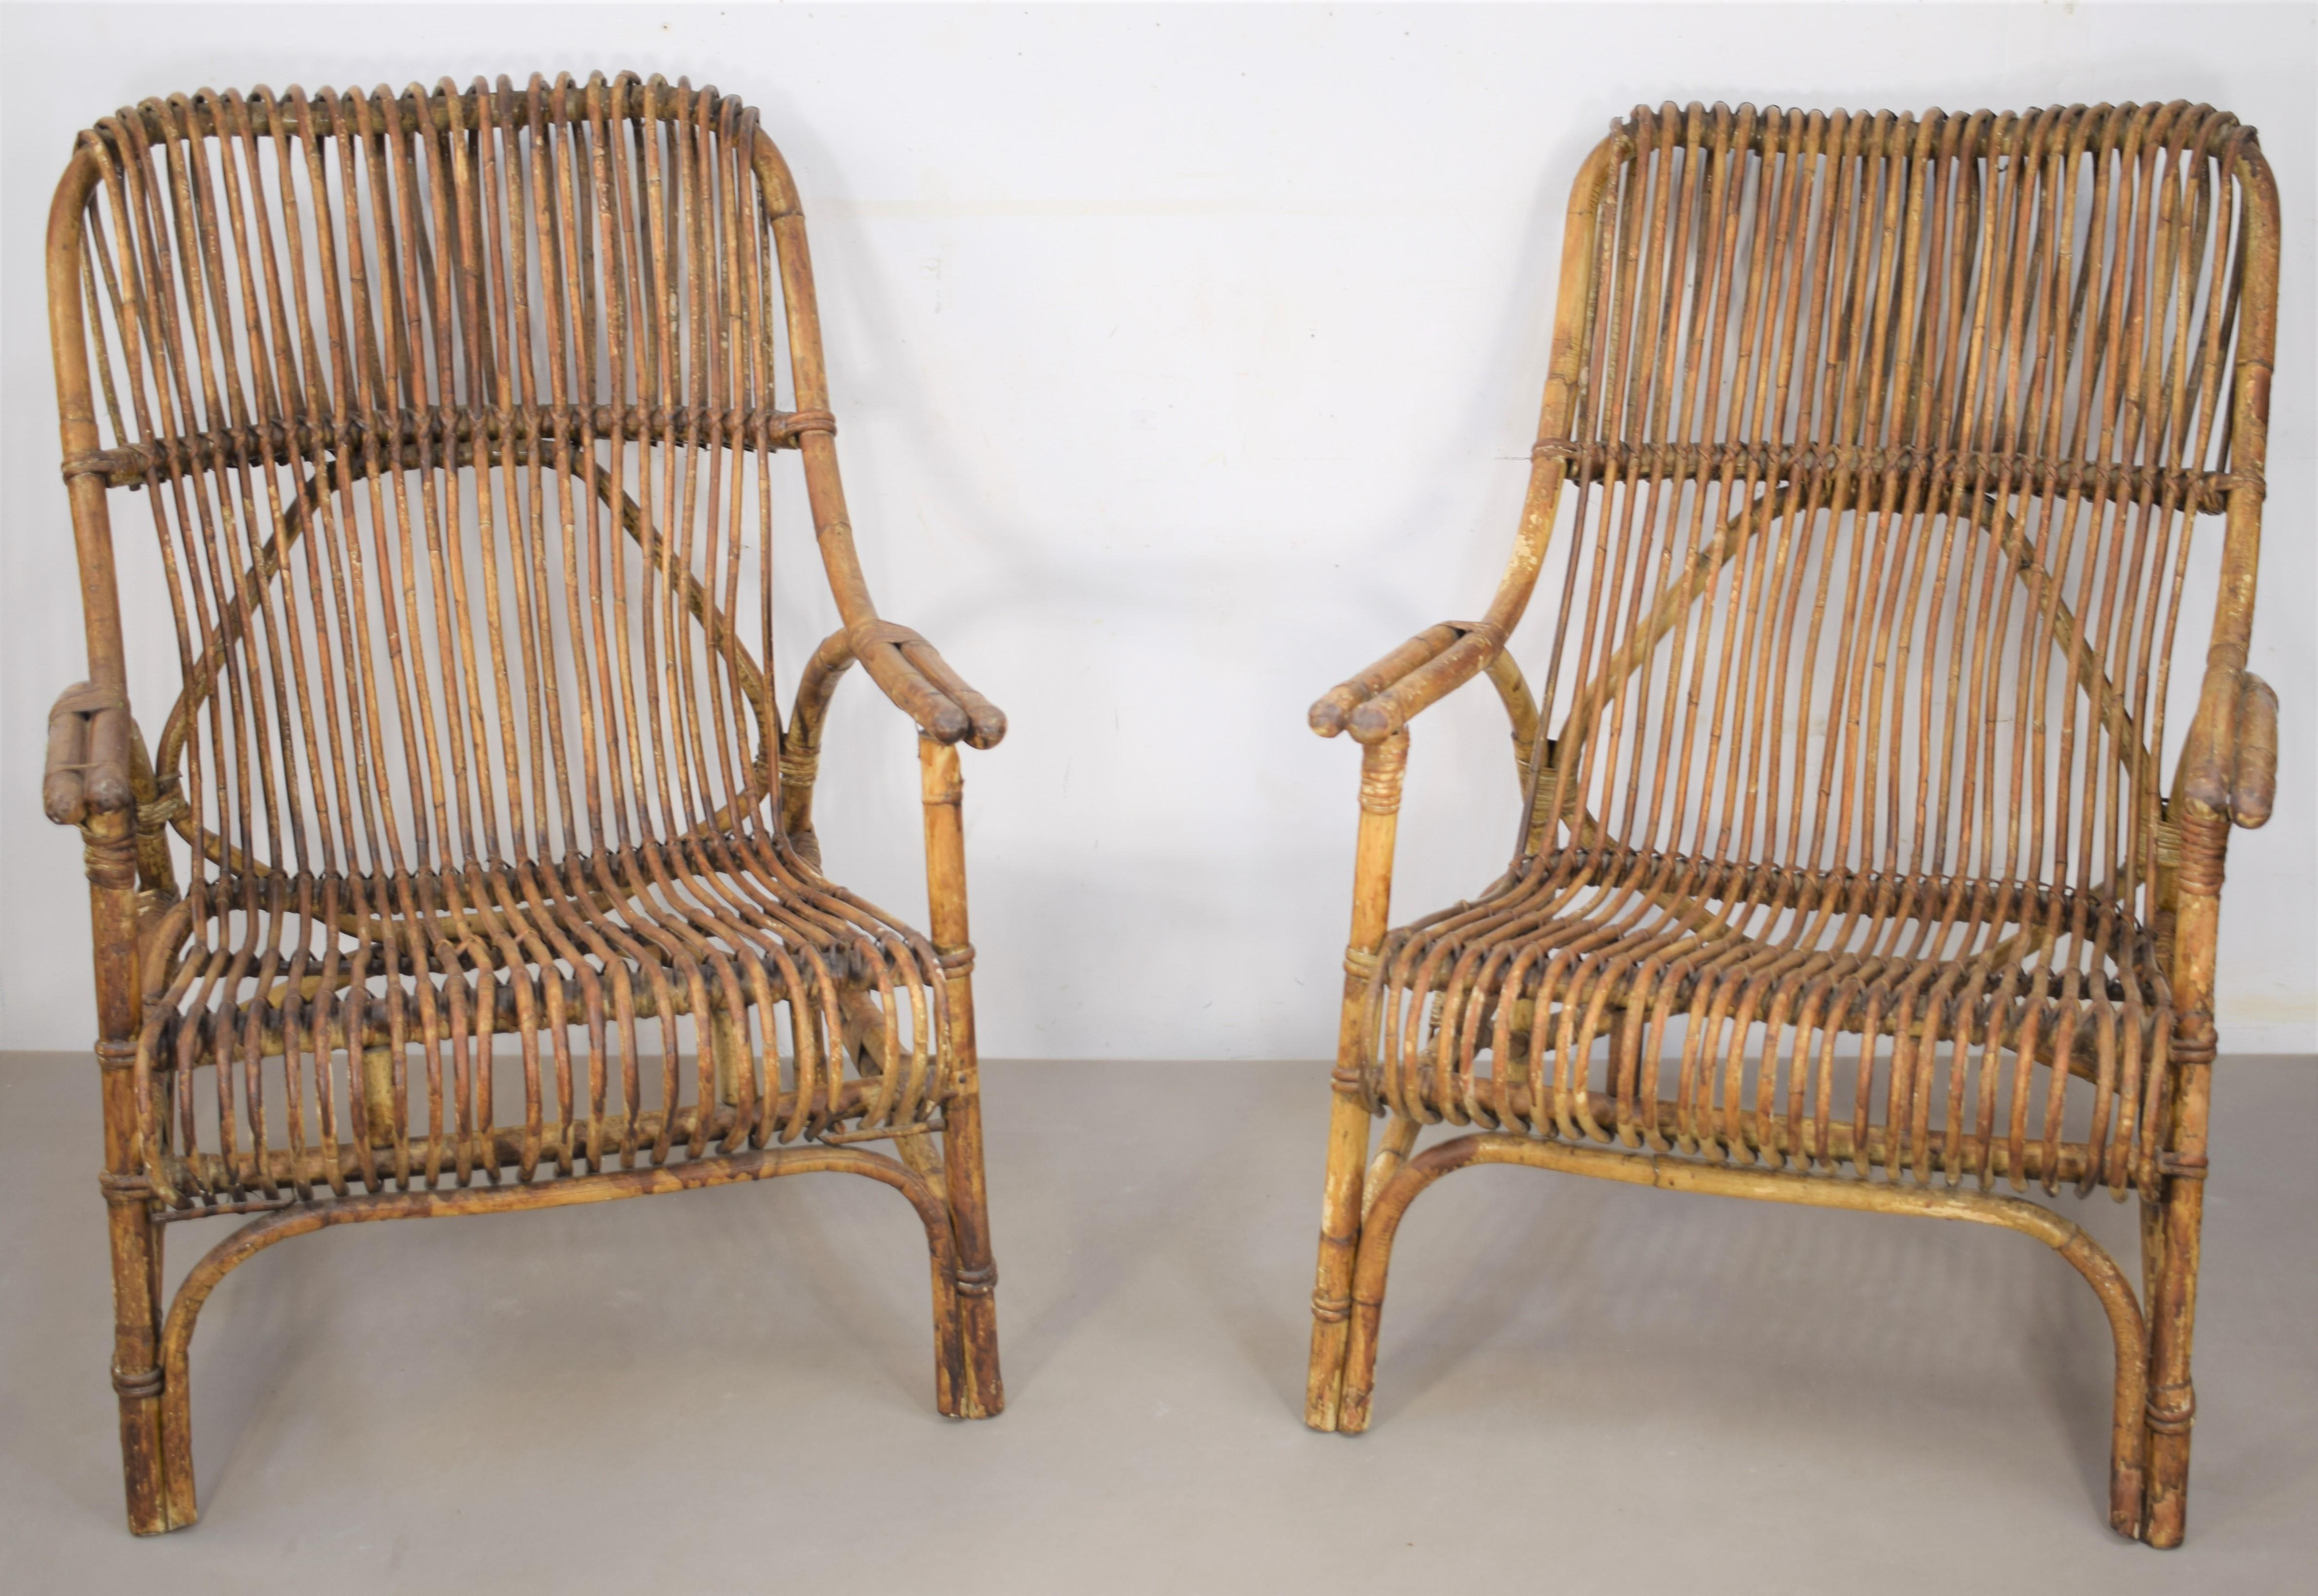 Pair of italian bamboo armchairs, 1960s.
Dimensions: H=95cm; W= 90 cm; D=85 cm; Height seat =40.